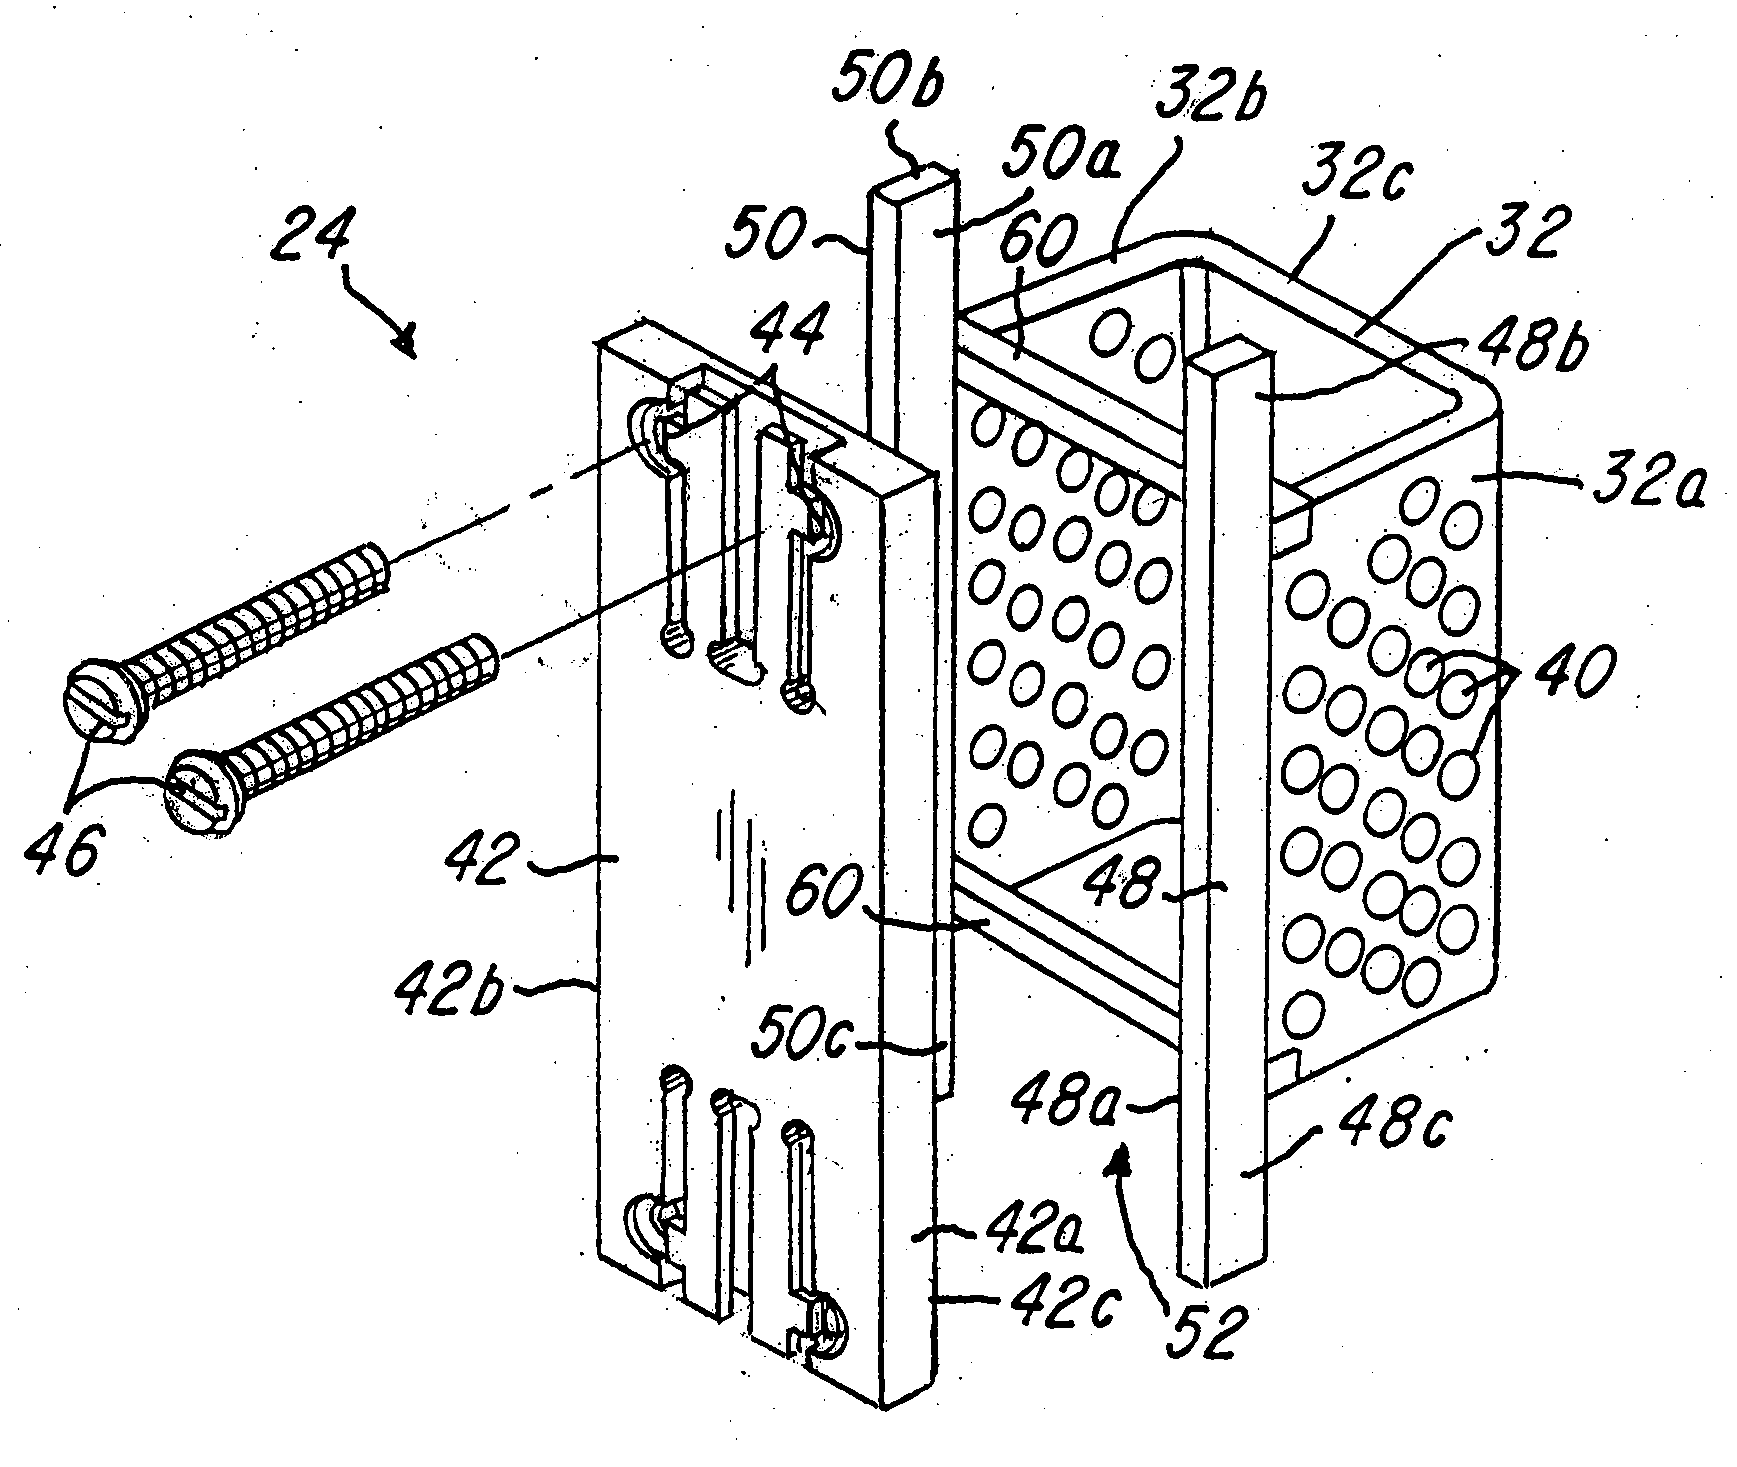 Spinal fusion system utilizing an implant plate having at least one integral lock